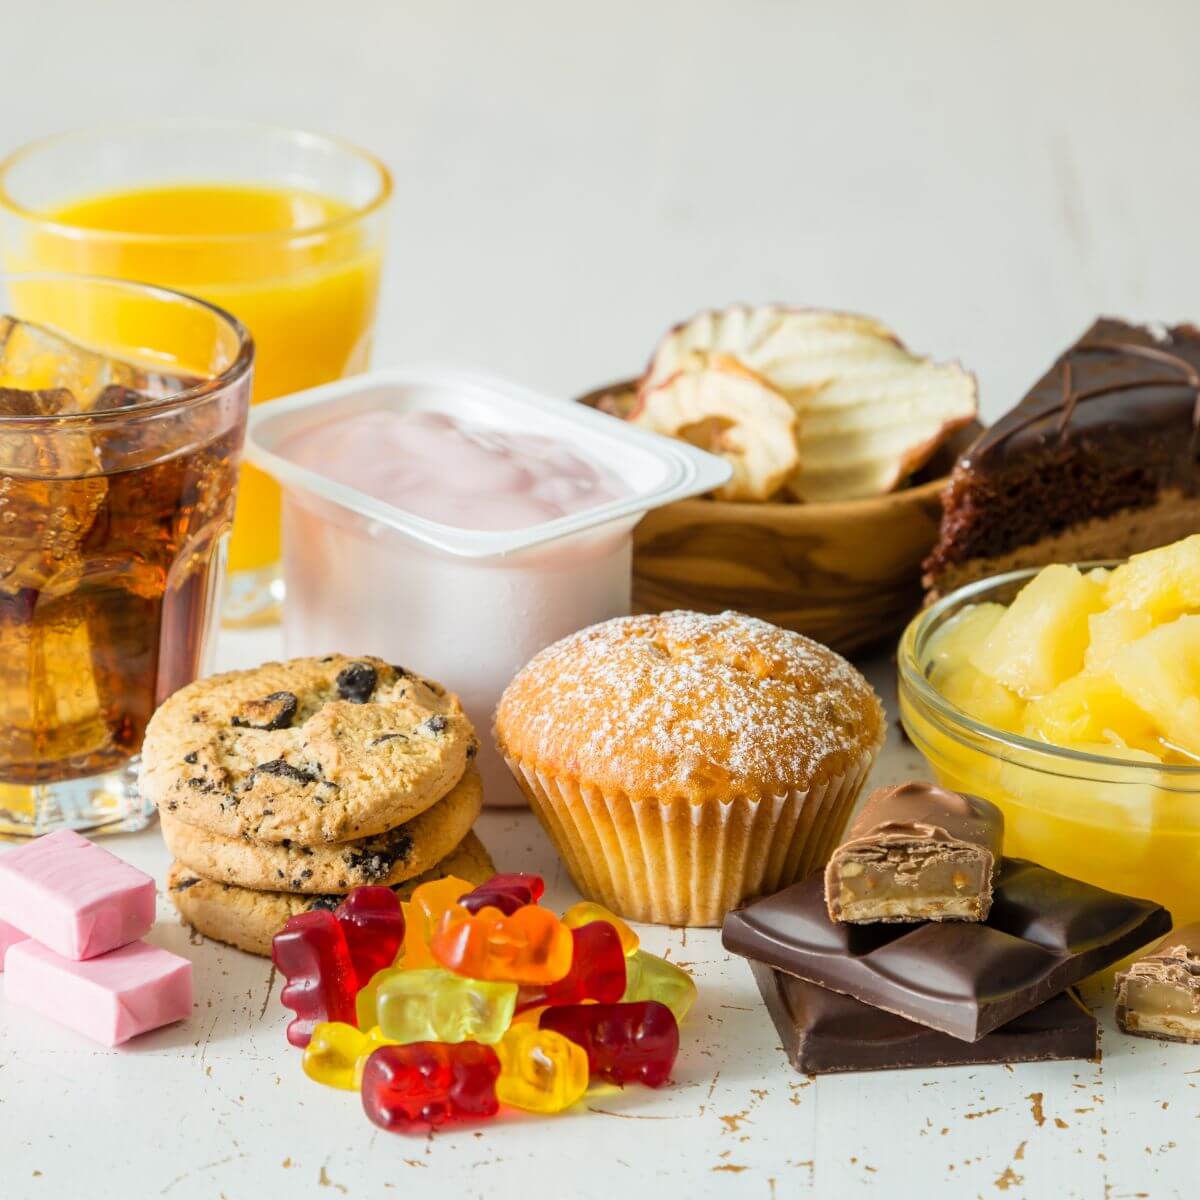 Ditch the refined sugar